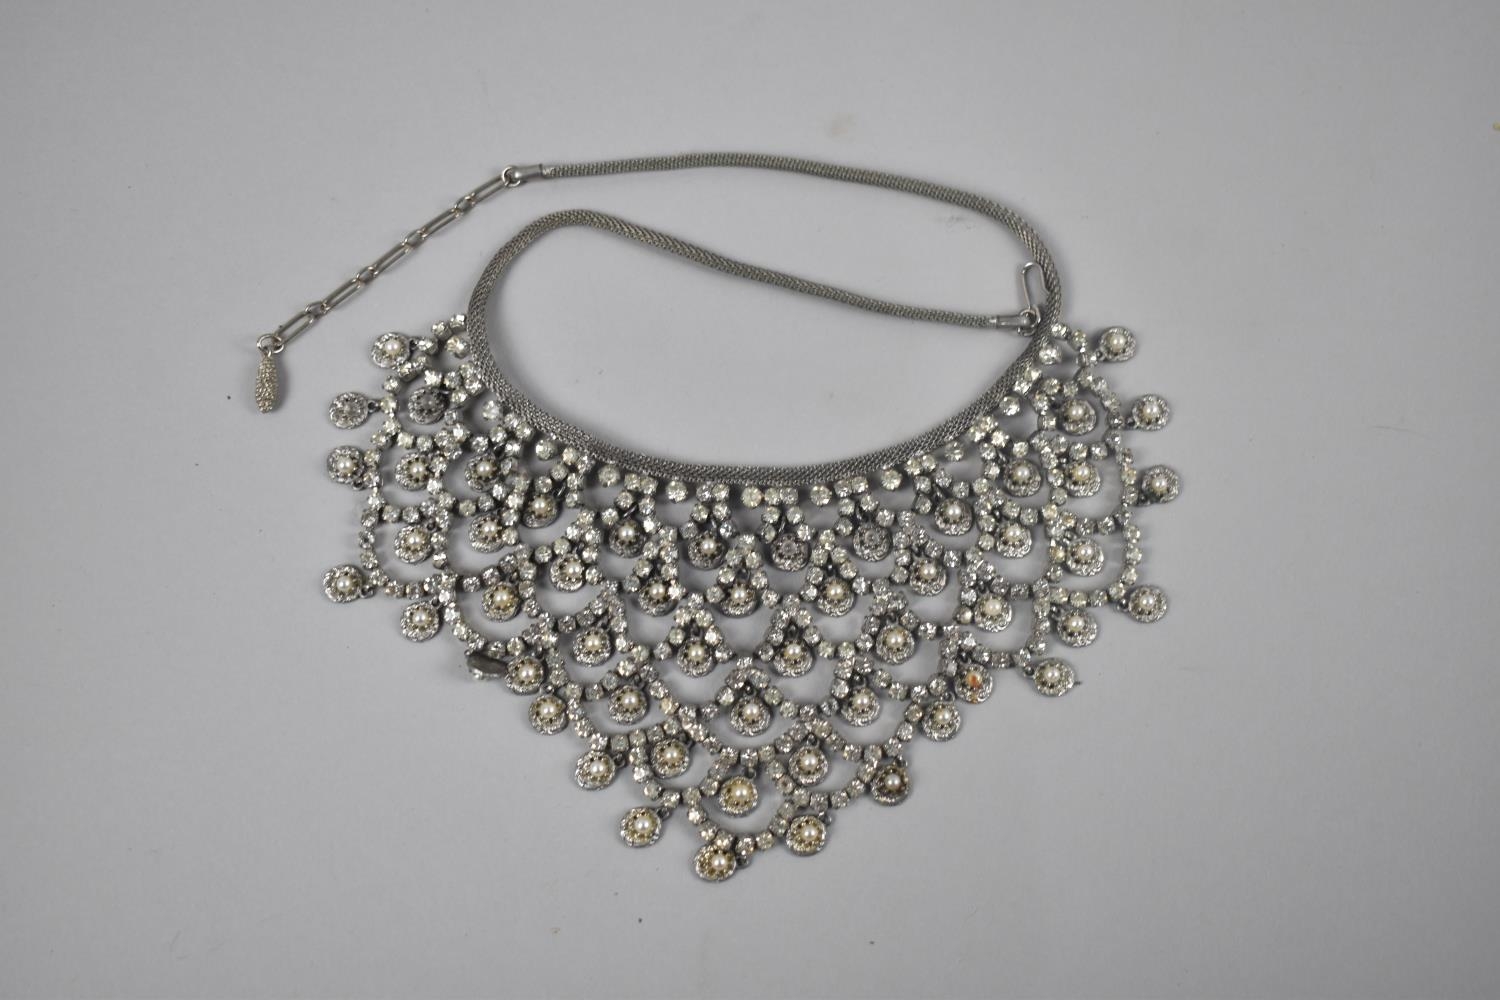 A Vintage Rhinestone and Faux Pearl Mounted Bib Necklace in Vintage Box for Dixon-Phillip Diamond